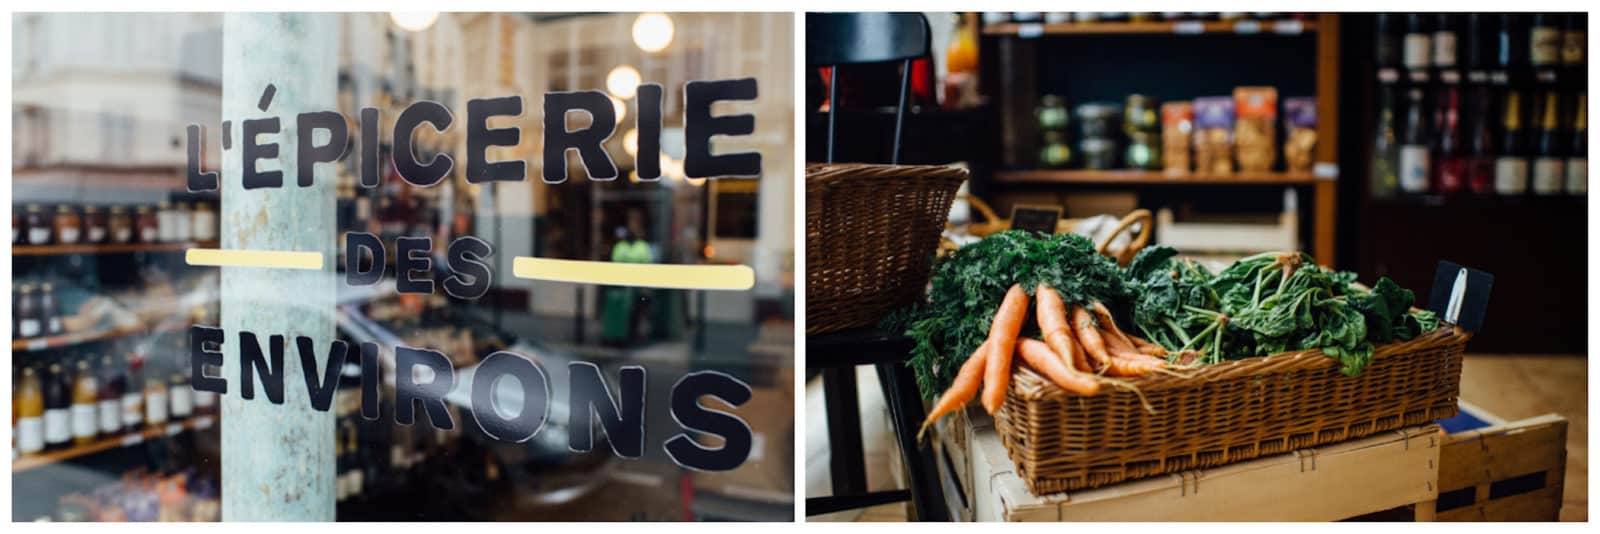 One of the best places to shop for sustainable, ethical and fair-trade food in Paris is grocery store L'Epicerie des Environs, with its shelves lined with products from all over France, as well as fresh vegetables like this basket of carrots.